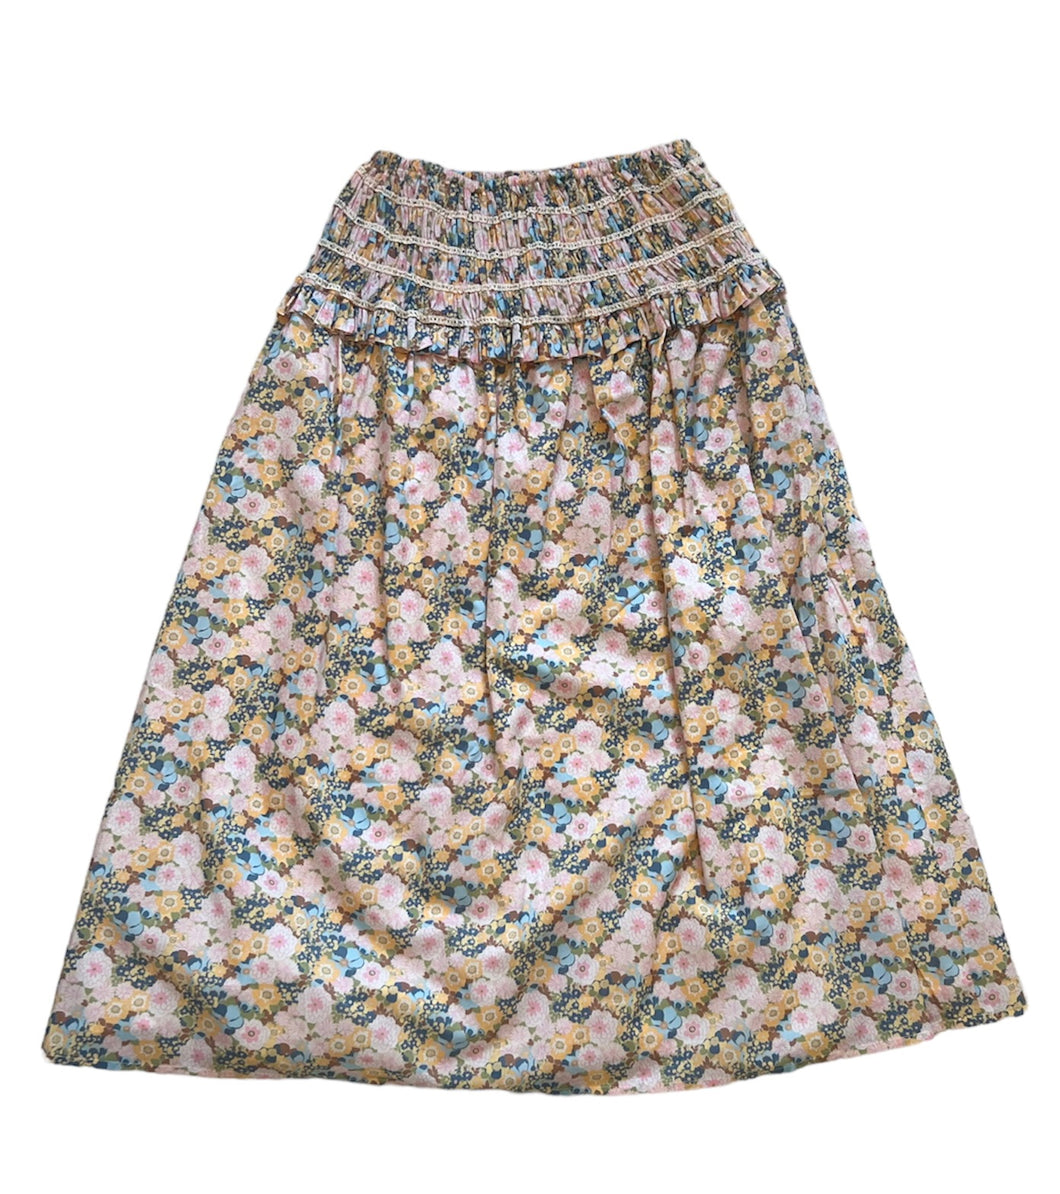 Andion Ingrid Skirt in Yellow Floral